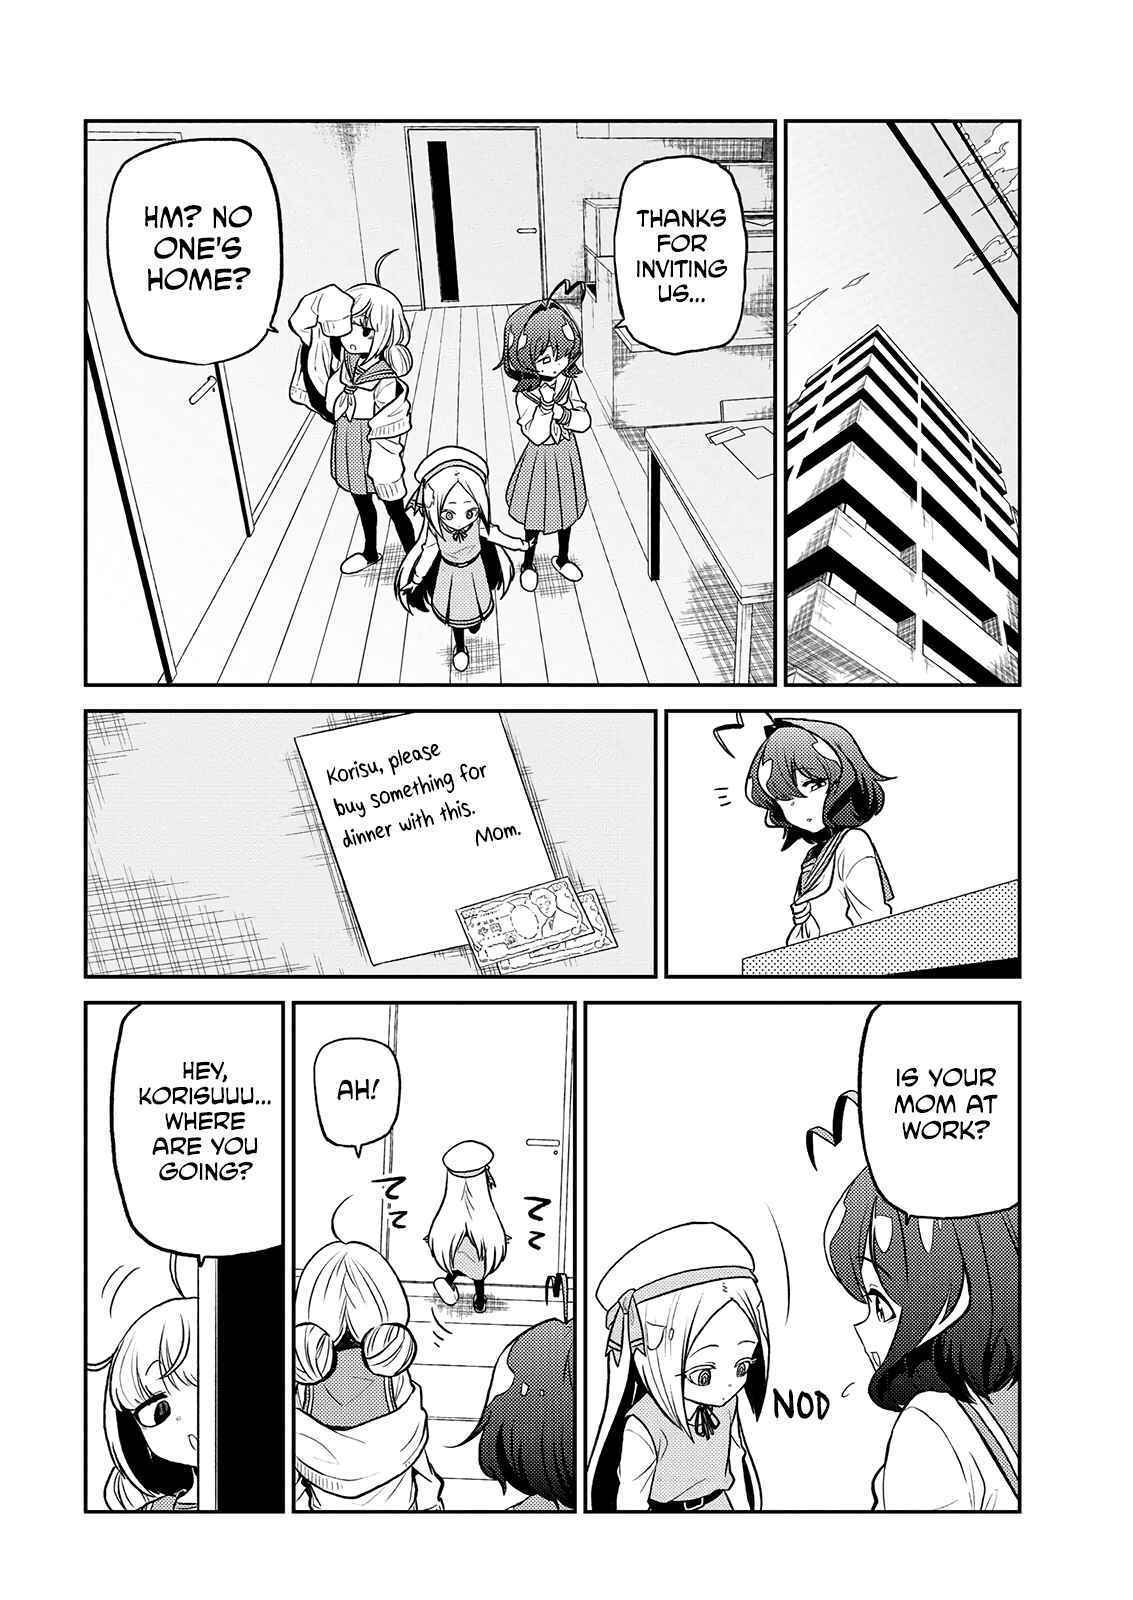 Looking Up To Magical Girls Vol. 2 Ch. 11